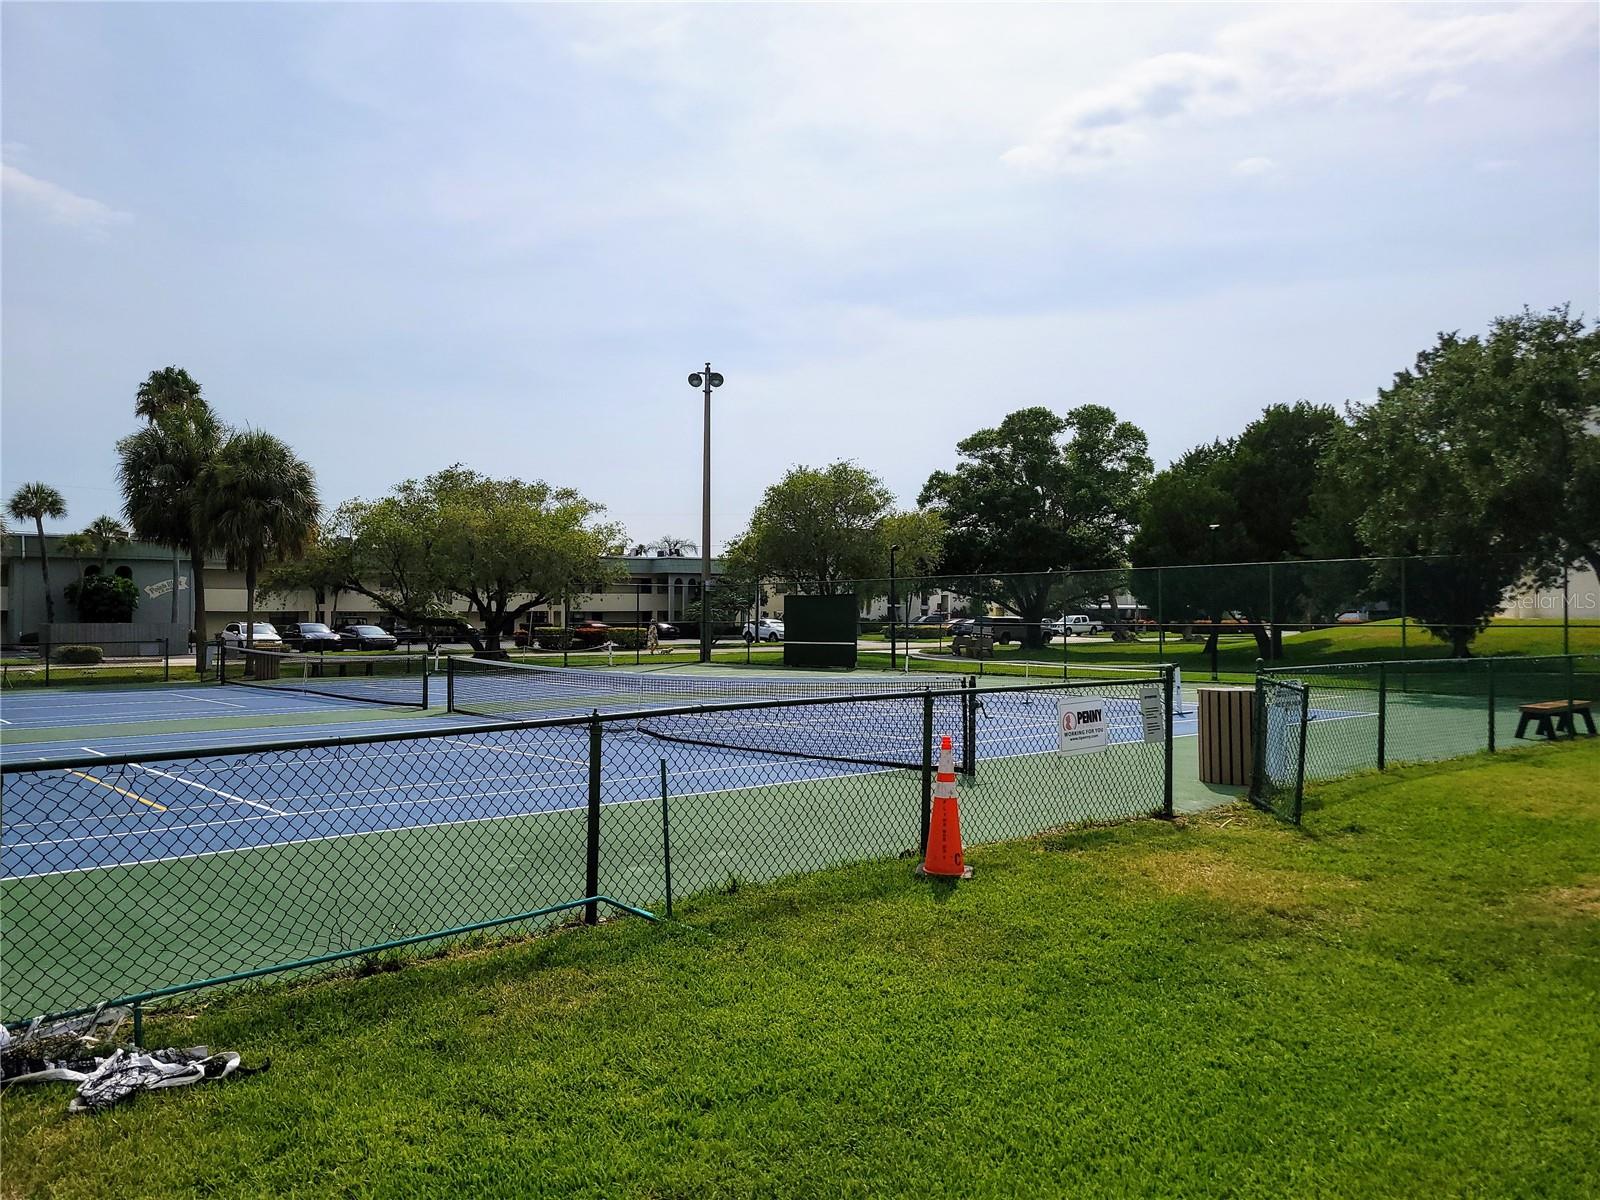 Lighted Tennis Courts at Rosselli Park